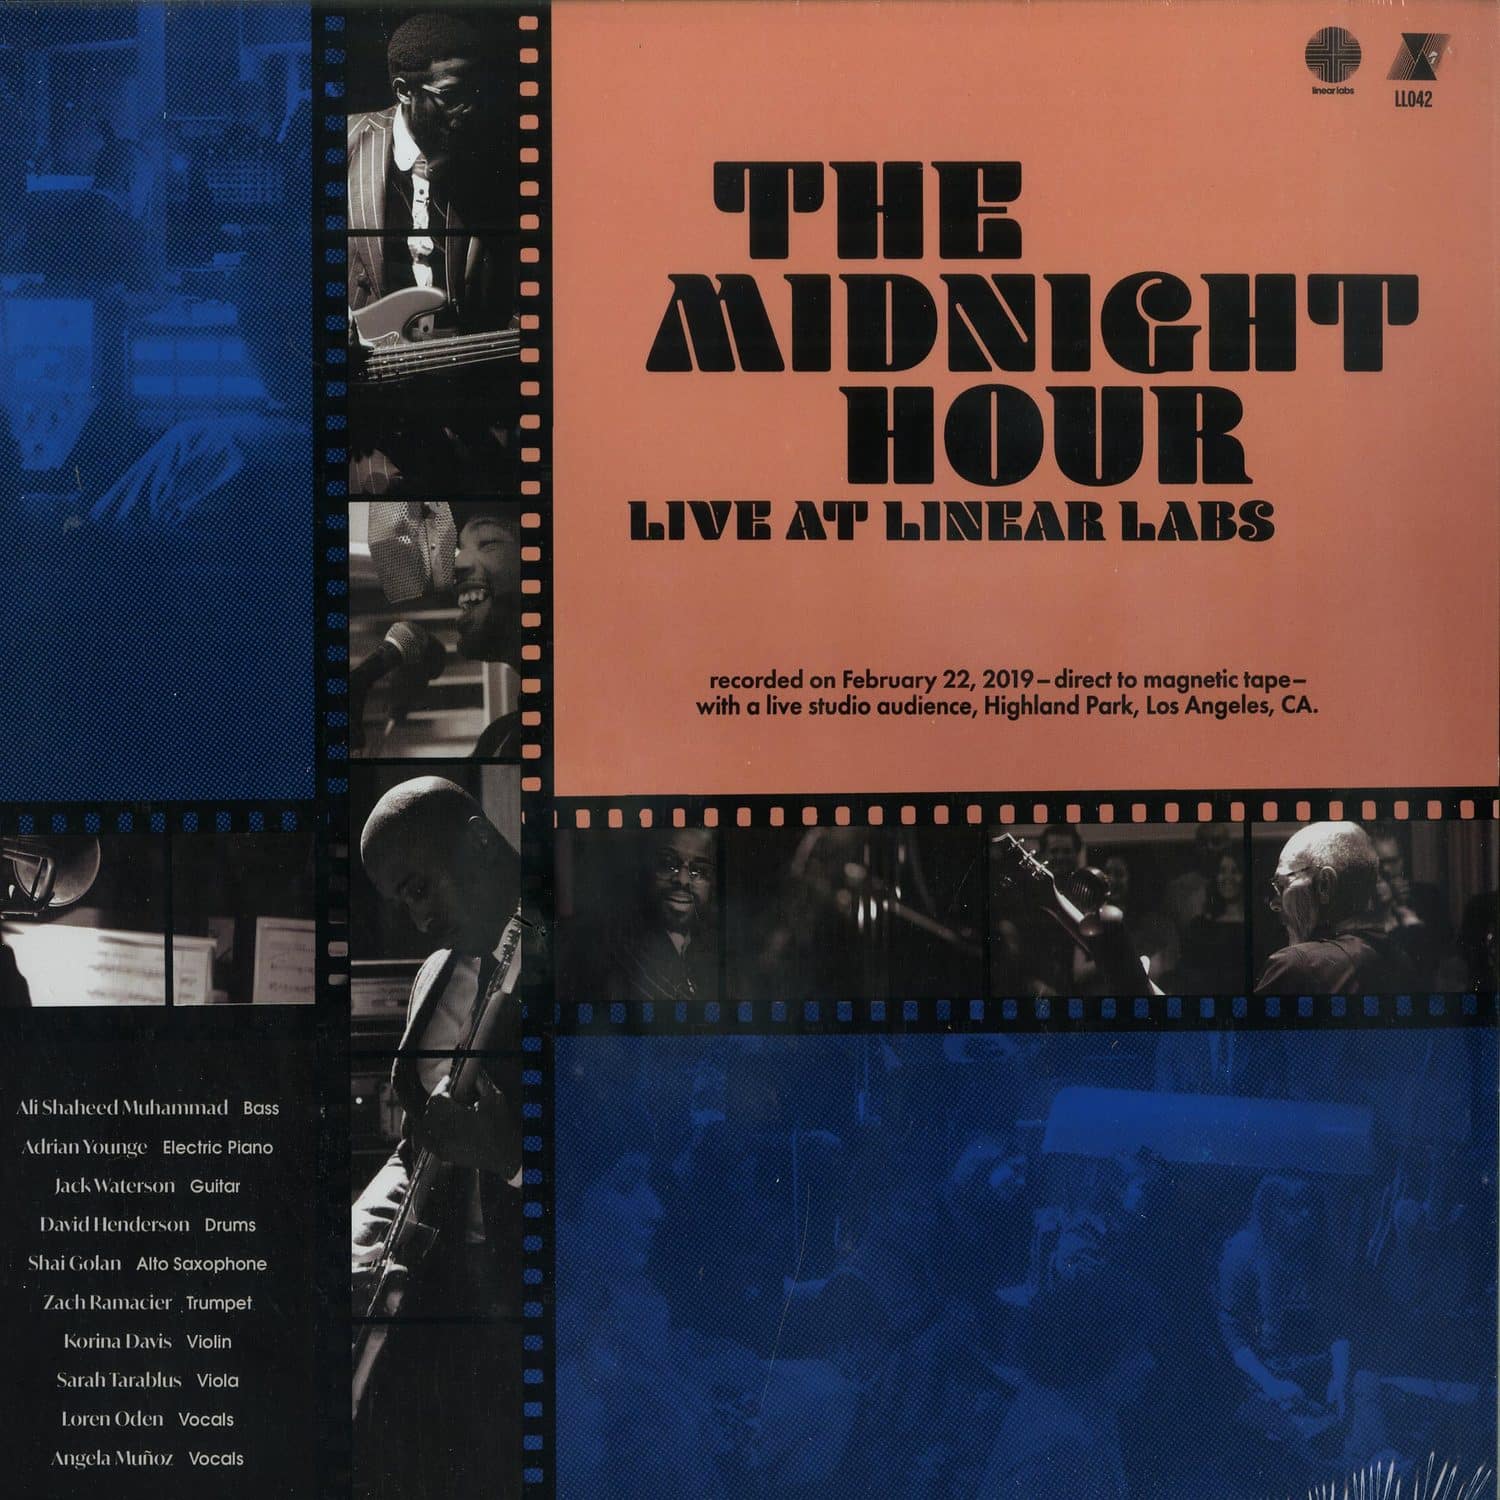 Adrian Younge & Ali Shaheed Muhammad - THE MIDNIGHT HOUR LIVE AT LINEAR LABS 